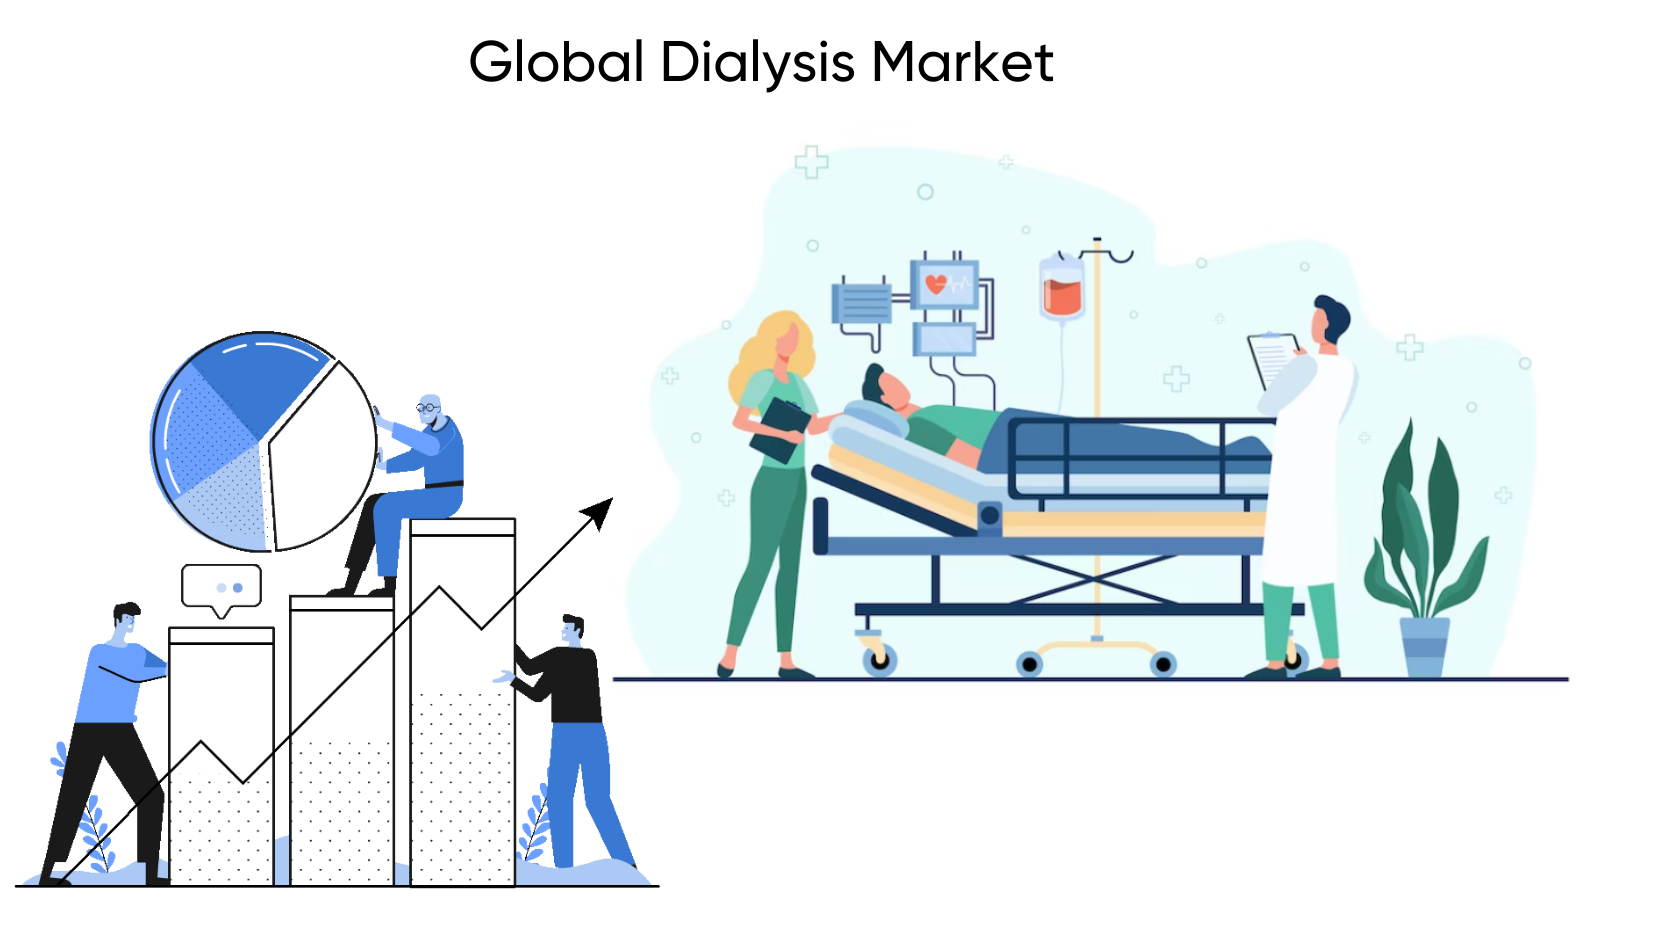 Dialysis Market Projected To Reach a Revised Size Of USD 185 Billion By 2032, Growing At A CAGR of 5.5%